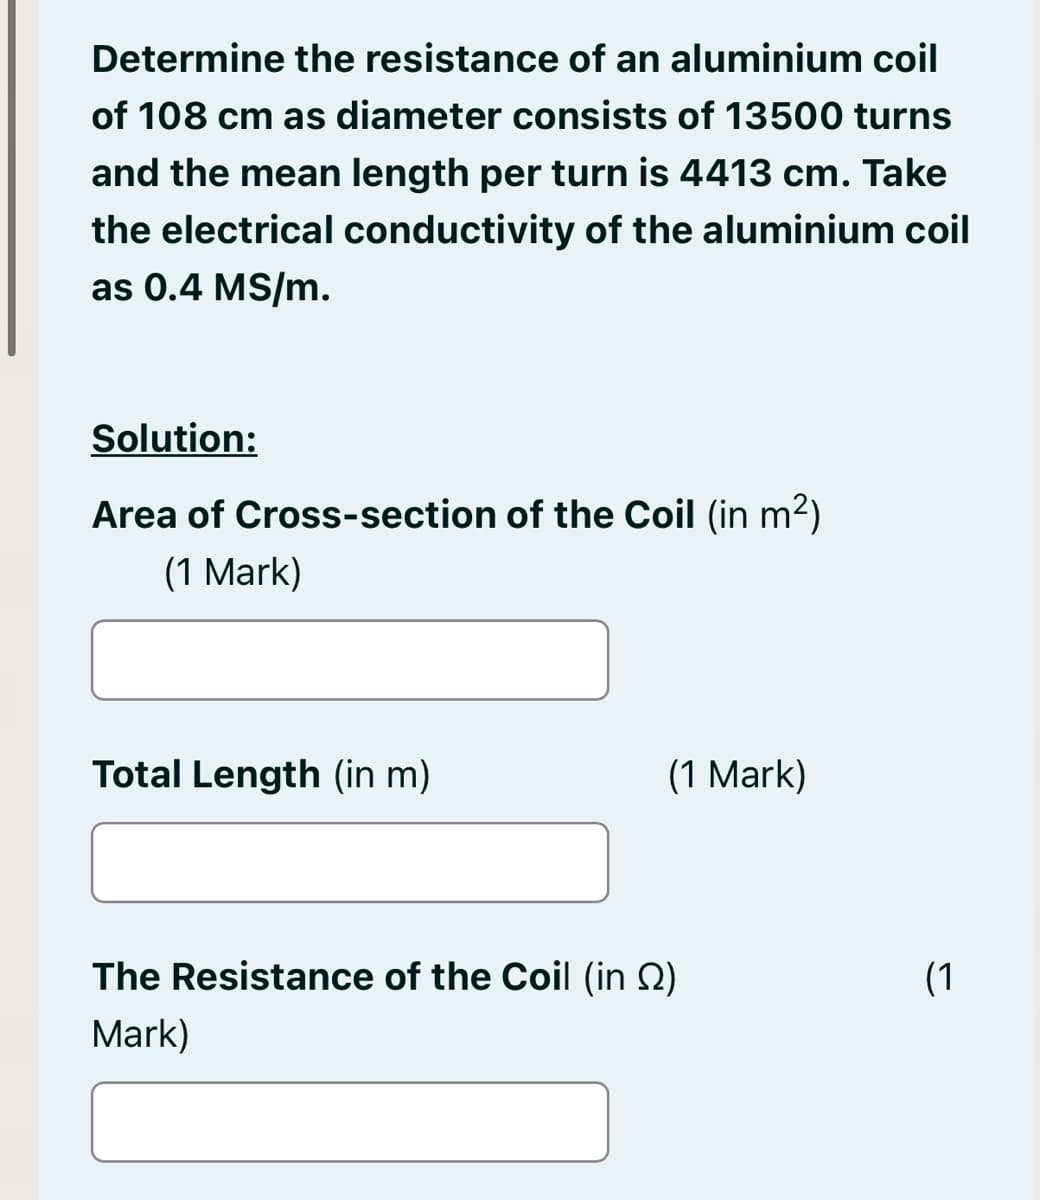 Determine the resistance of an aluminium coil
of 108 cm as diameter consists of 13500 turns
and the mean length per turn is 4413 cm. Take
the electrical conductivity of the aluminium coil
as 0.4 MS/m.
Solution:
Area of Cross-section of the Coil (in m²)
(1 Mark)
Total Length (in m)
(1 Mark)
The Resistance of the Coil (in )
Mark)
(1